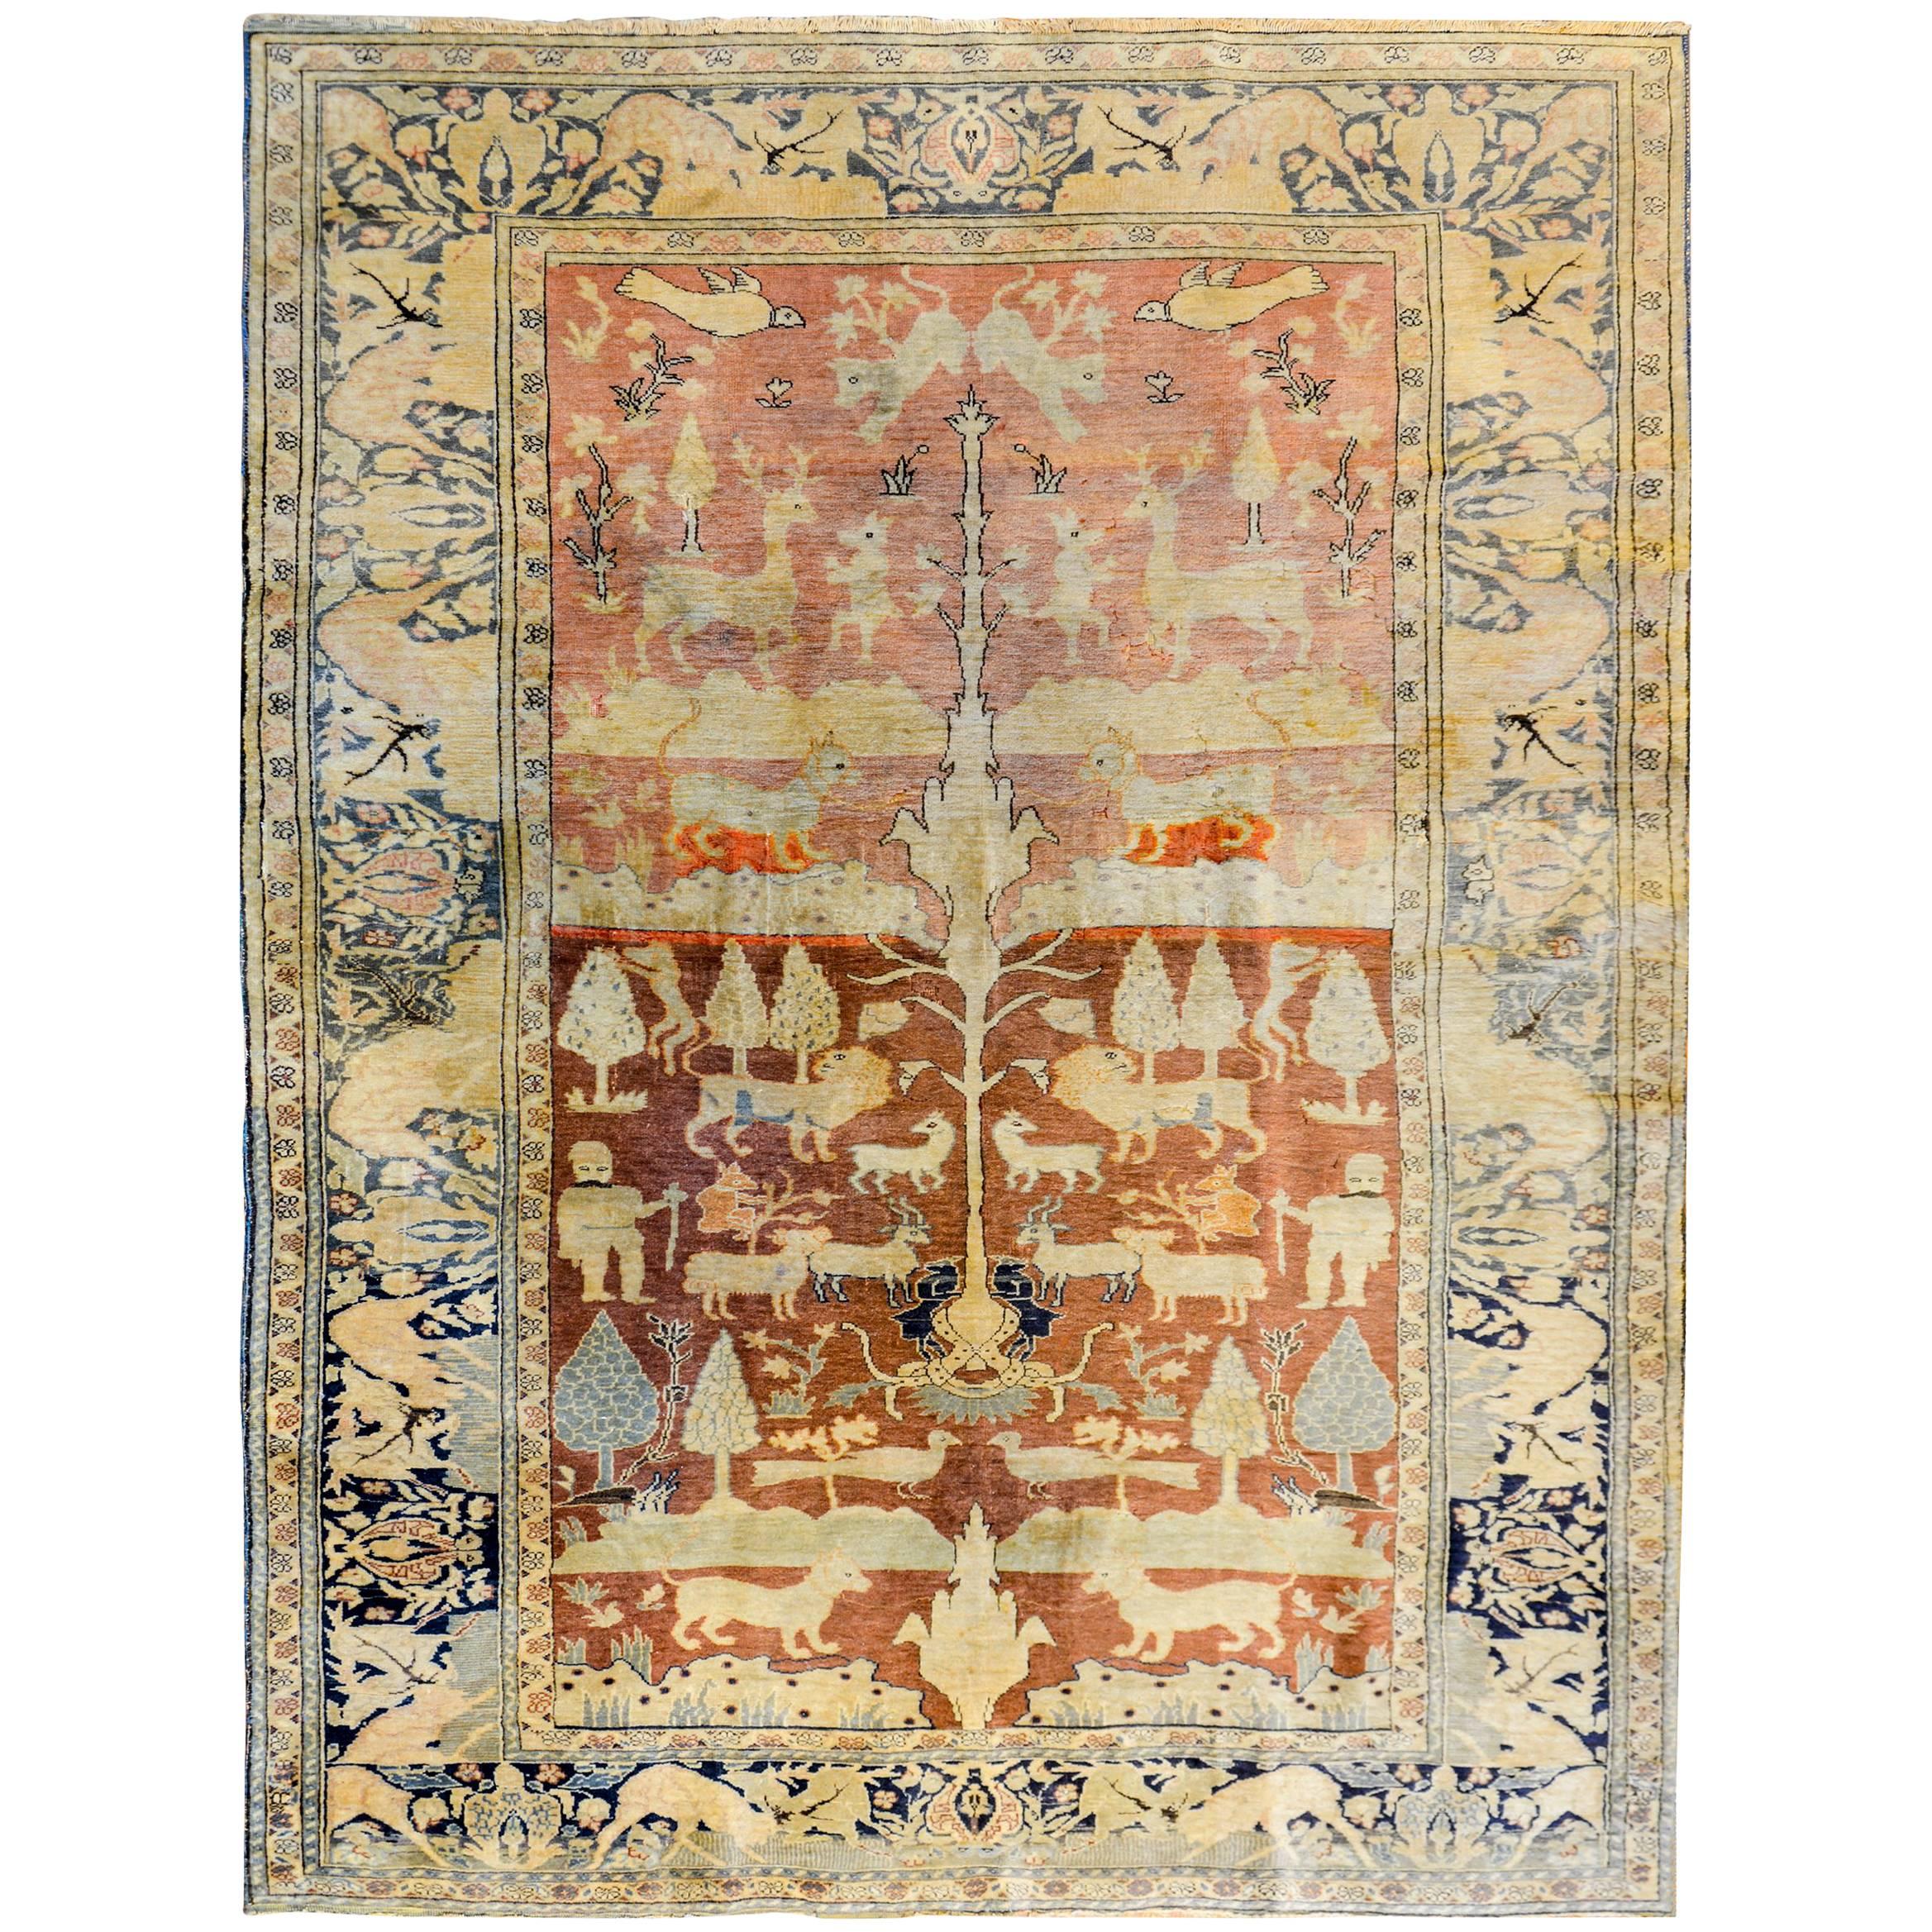 Wonderful Early 20th Century Pictorial Anatolian Rug